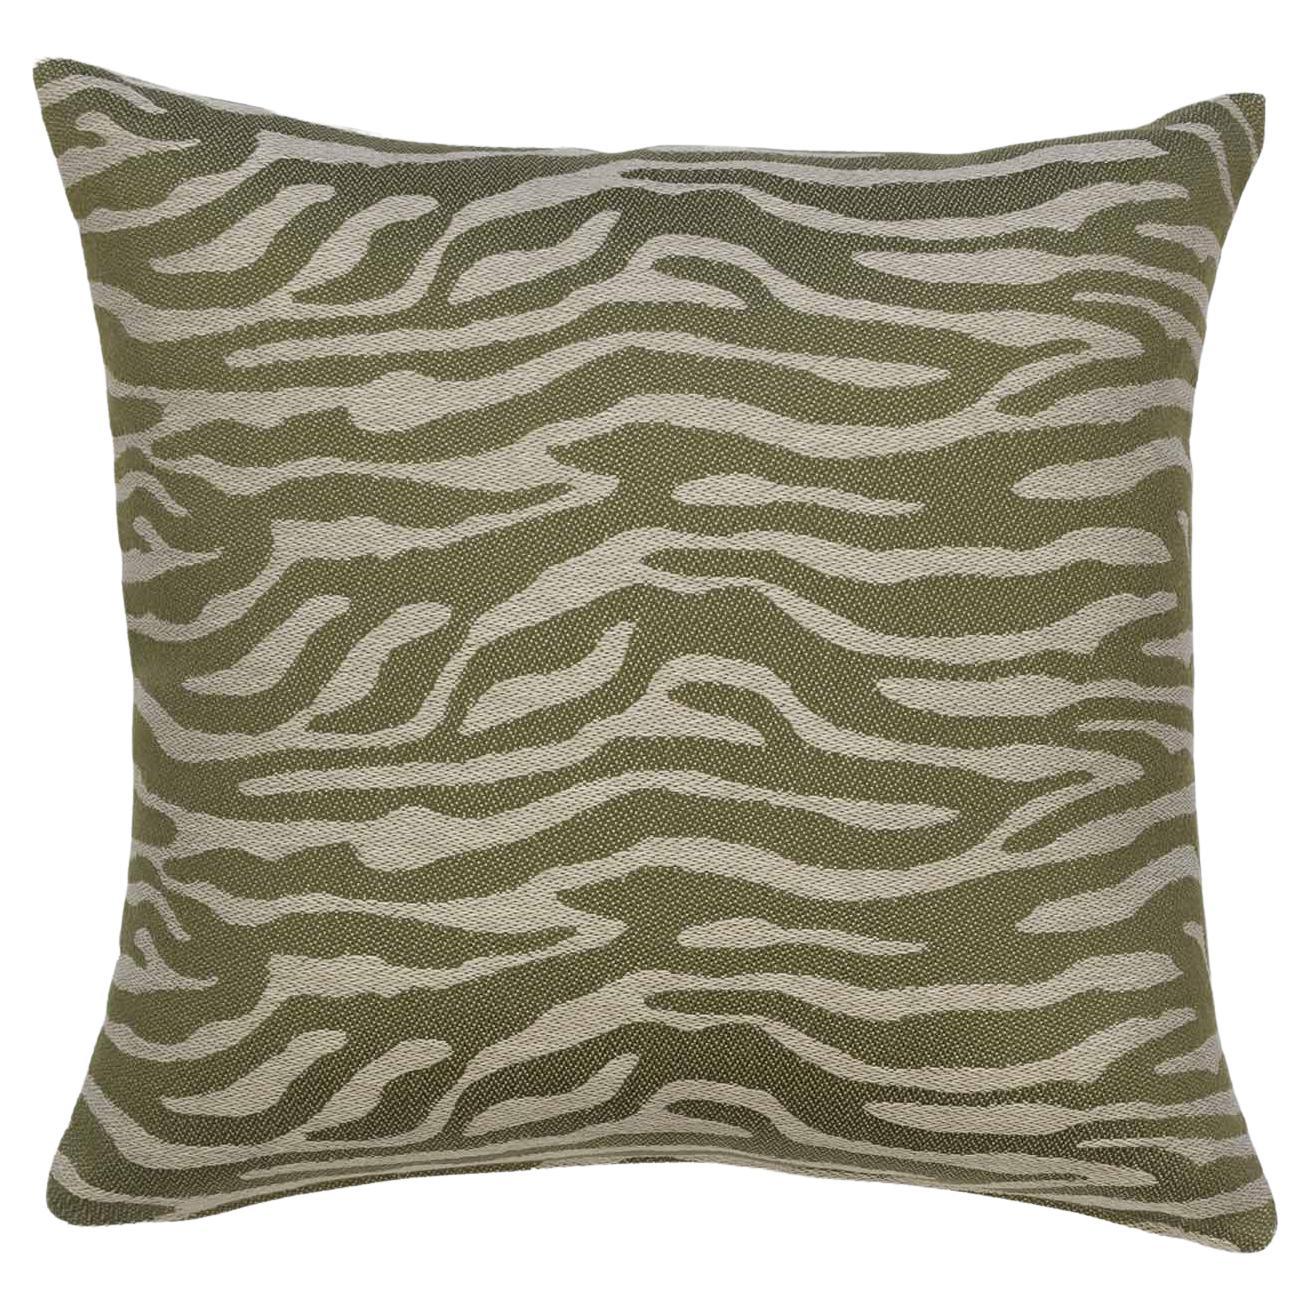 Modern Textured Patterned Throw Pillow Green "Cayenne" by Evolution 21 For Sale